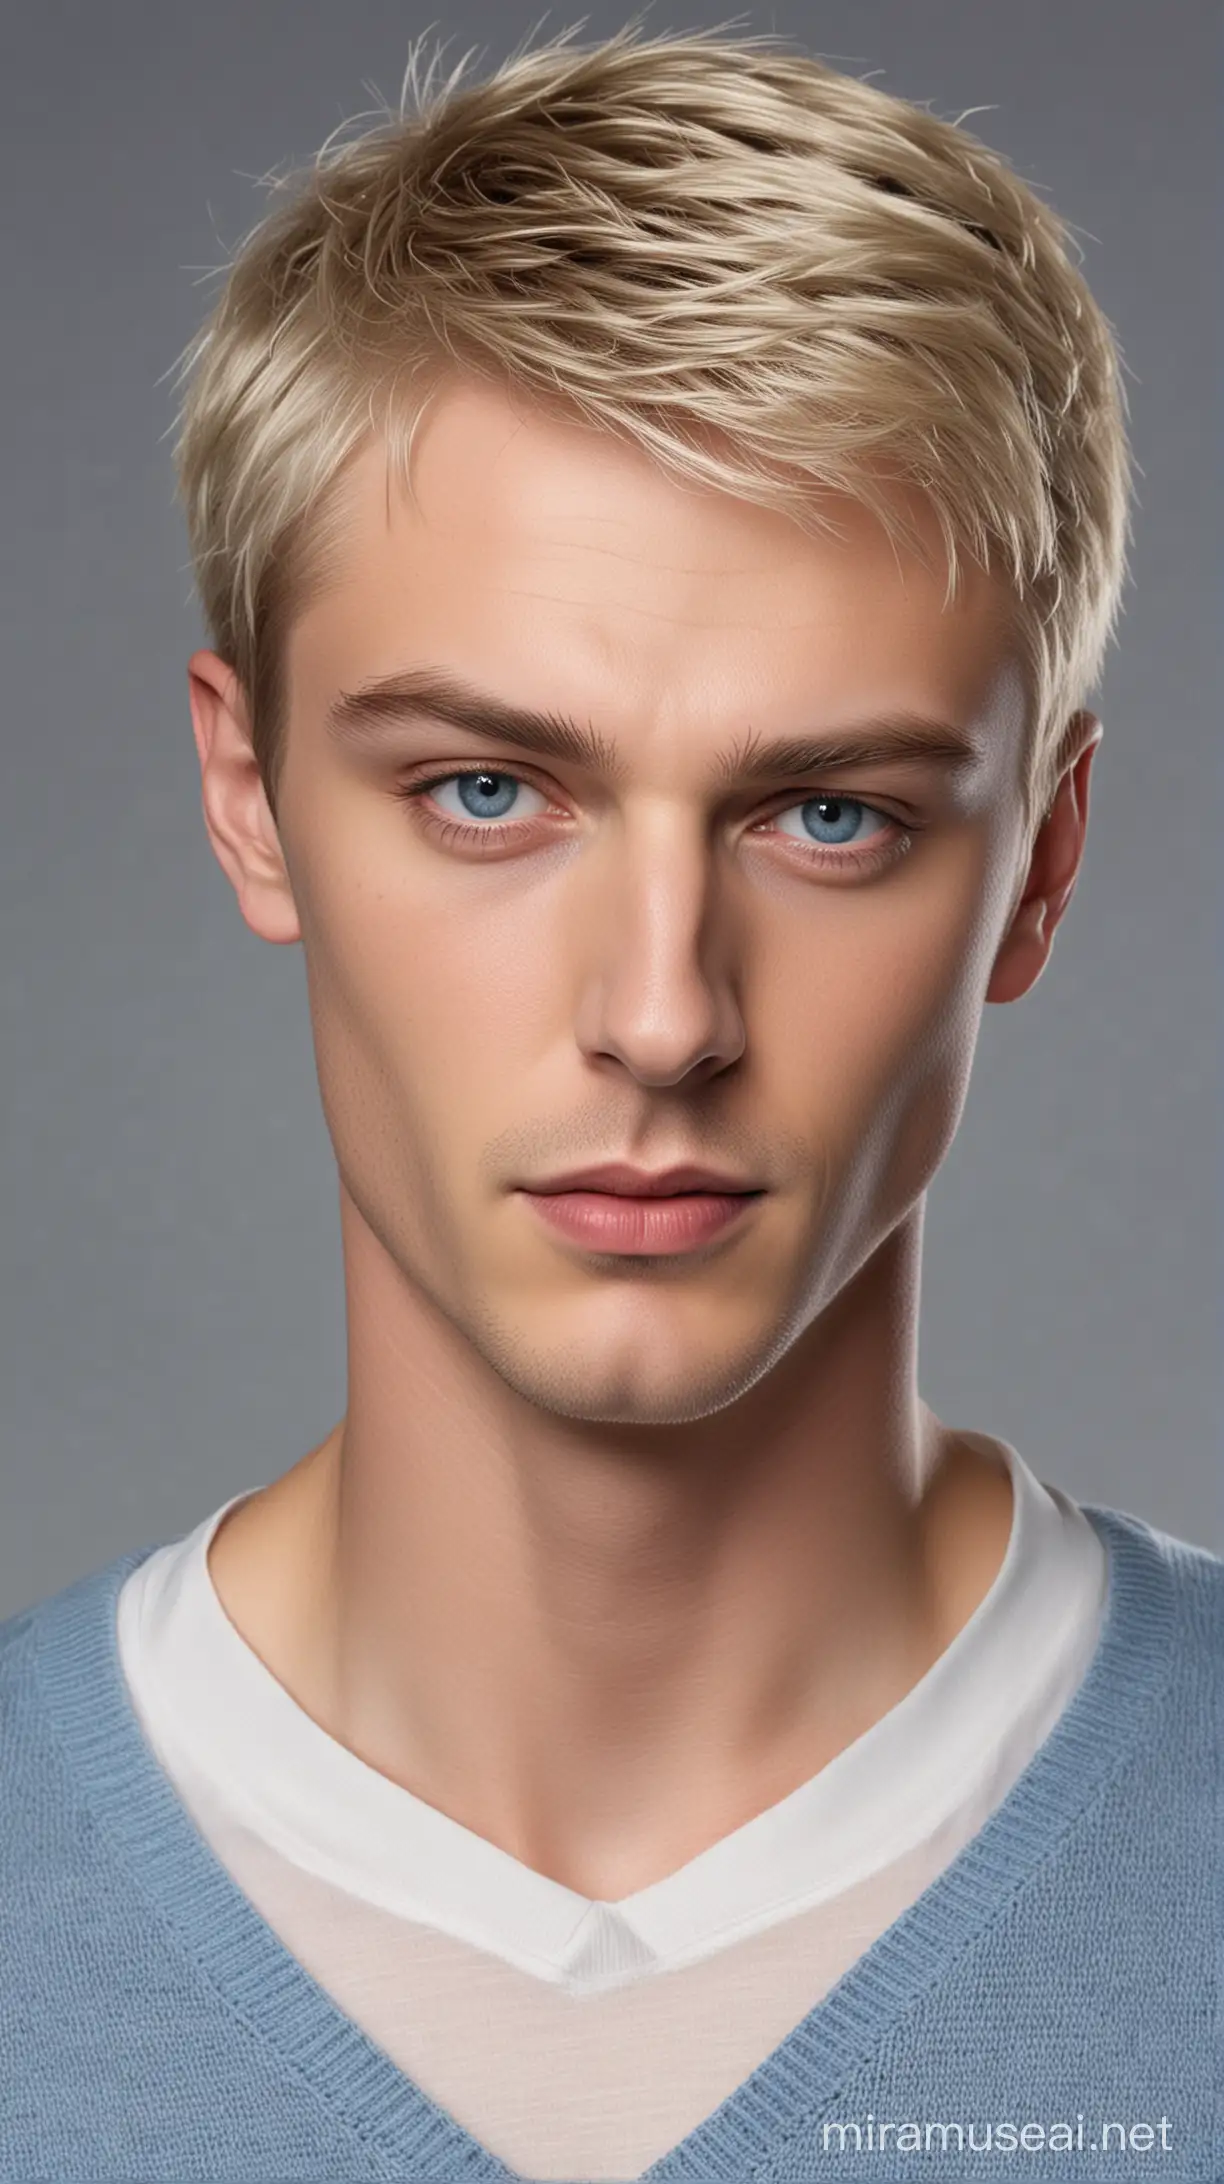 Tall Blond Man with VampireInspired Hairstyle and Blue Eyes in White Shirt and Blue Jumper